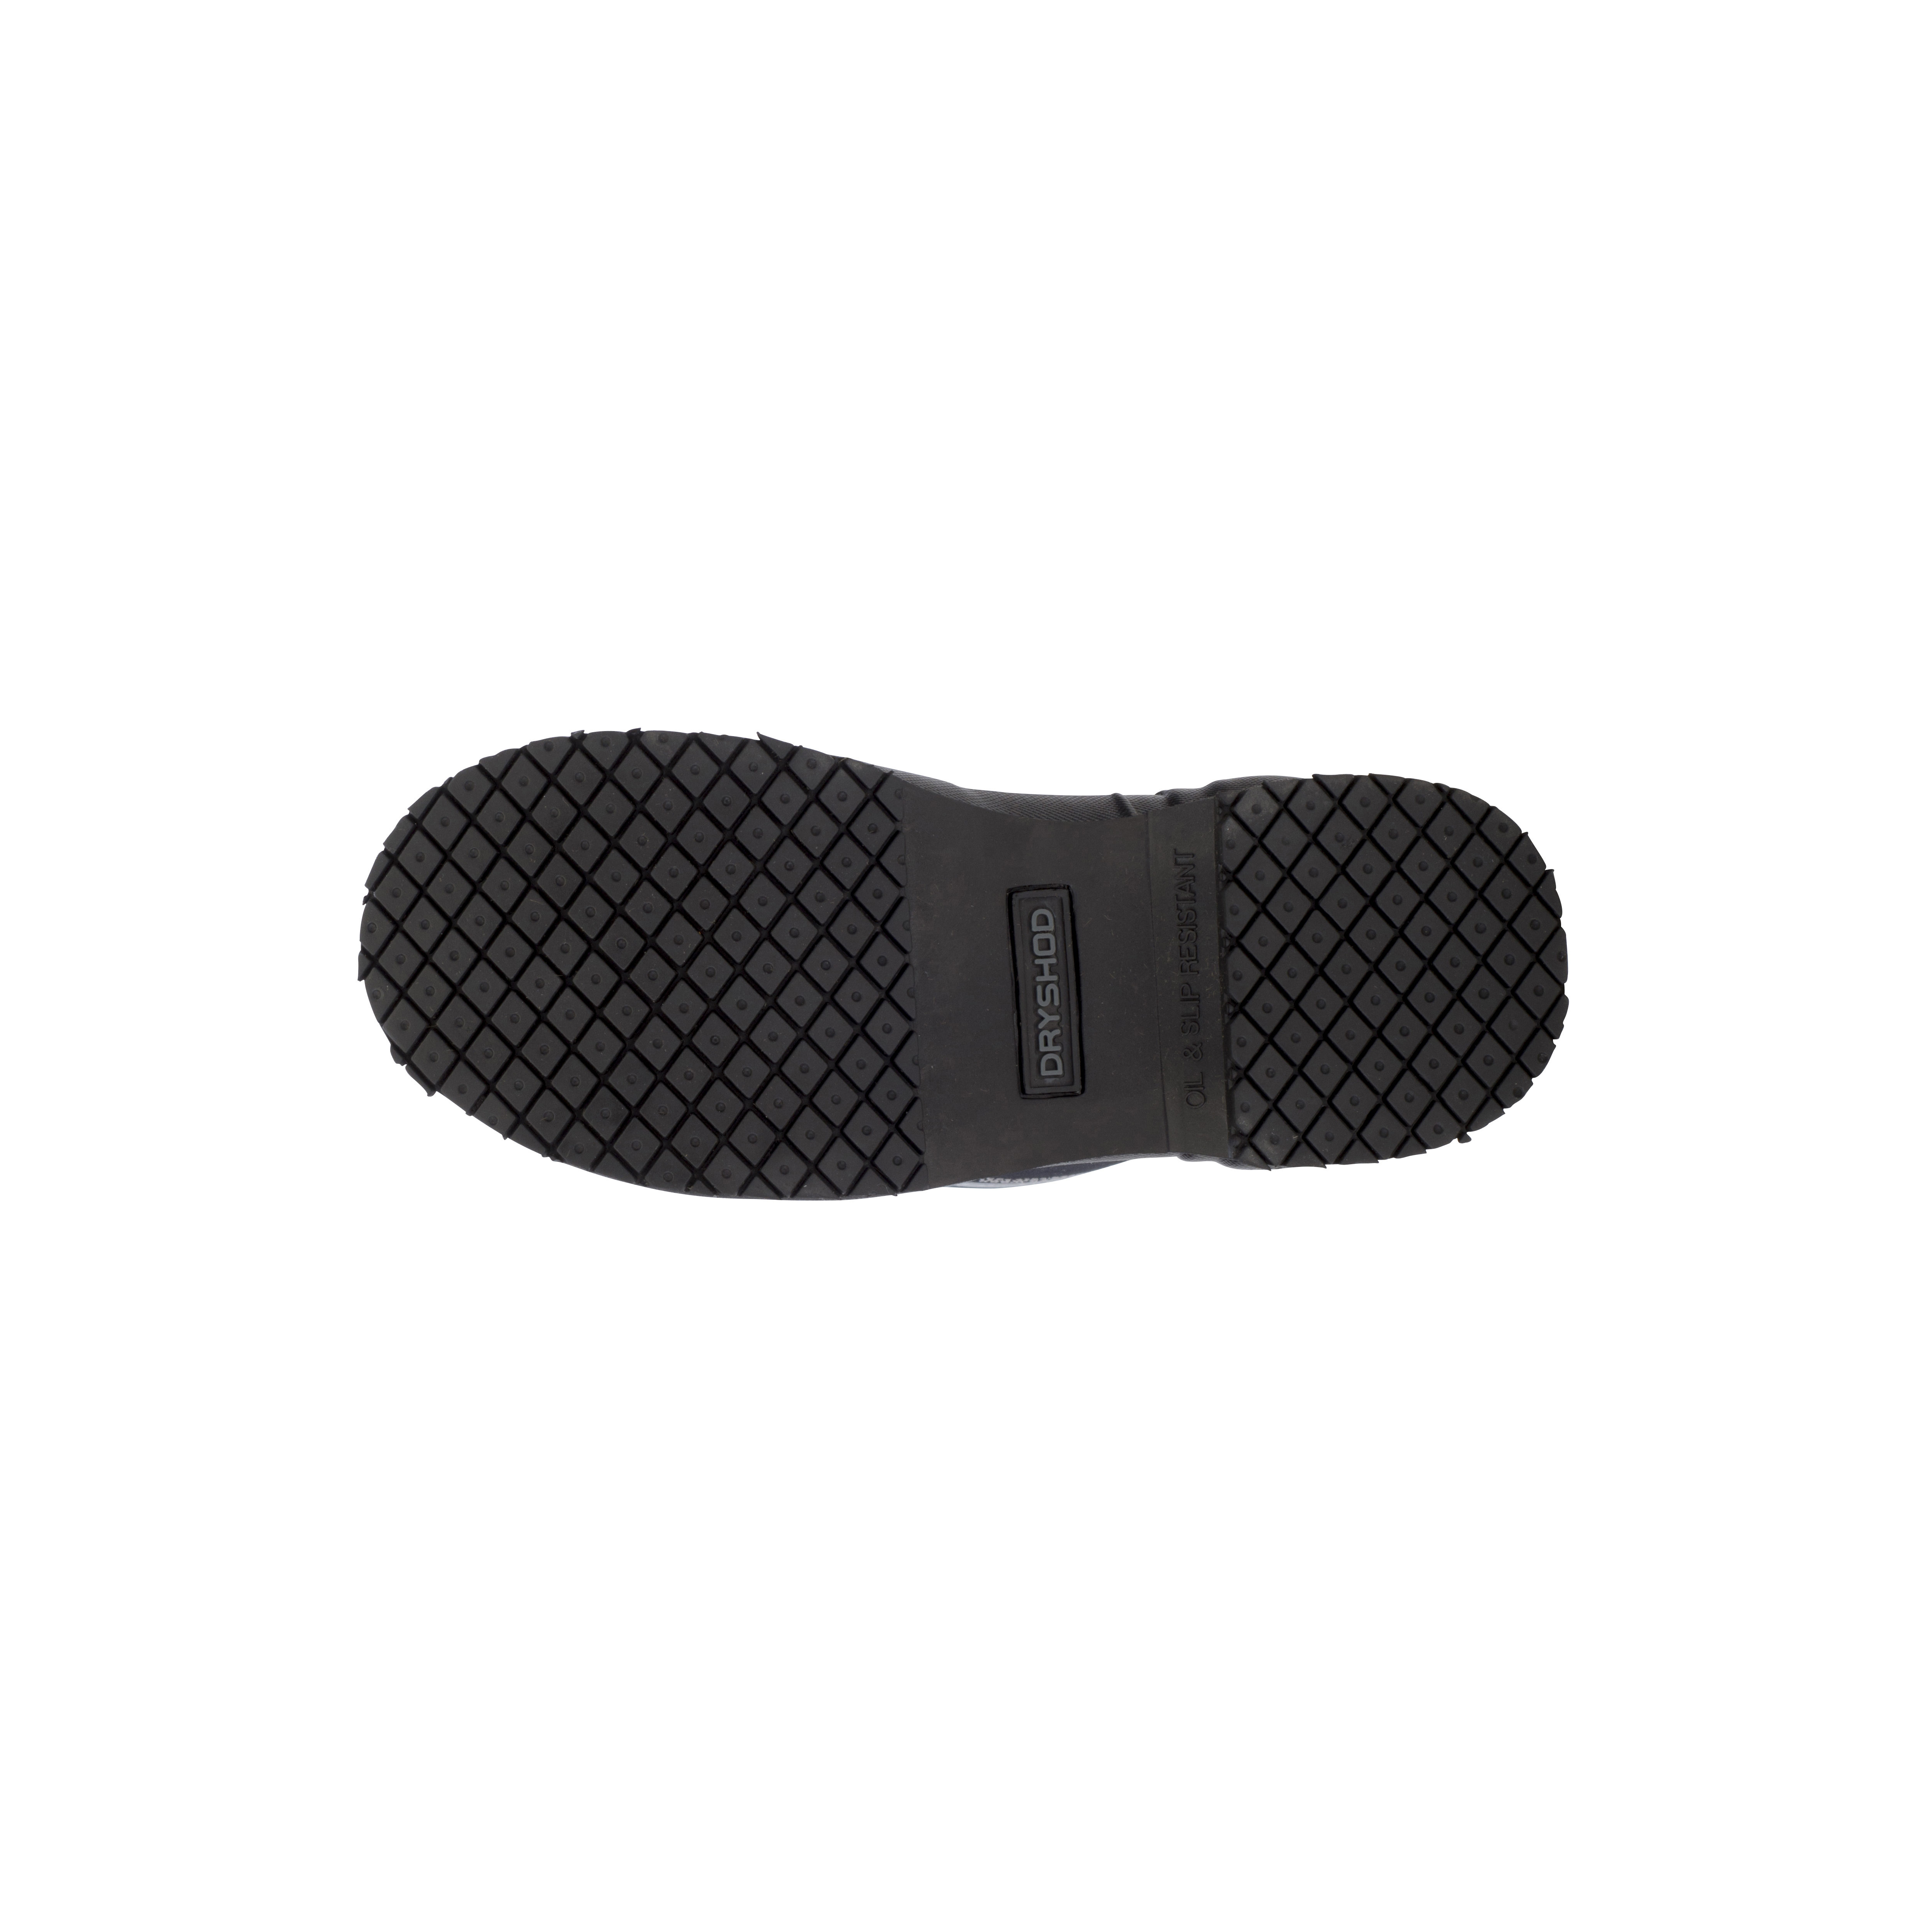 Solid Rubber Outsole - Dryshod 